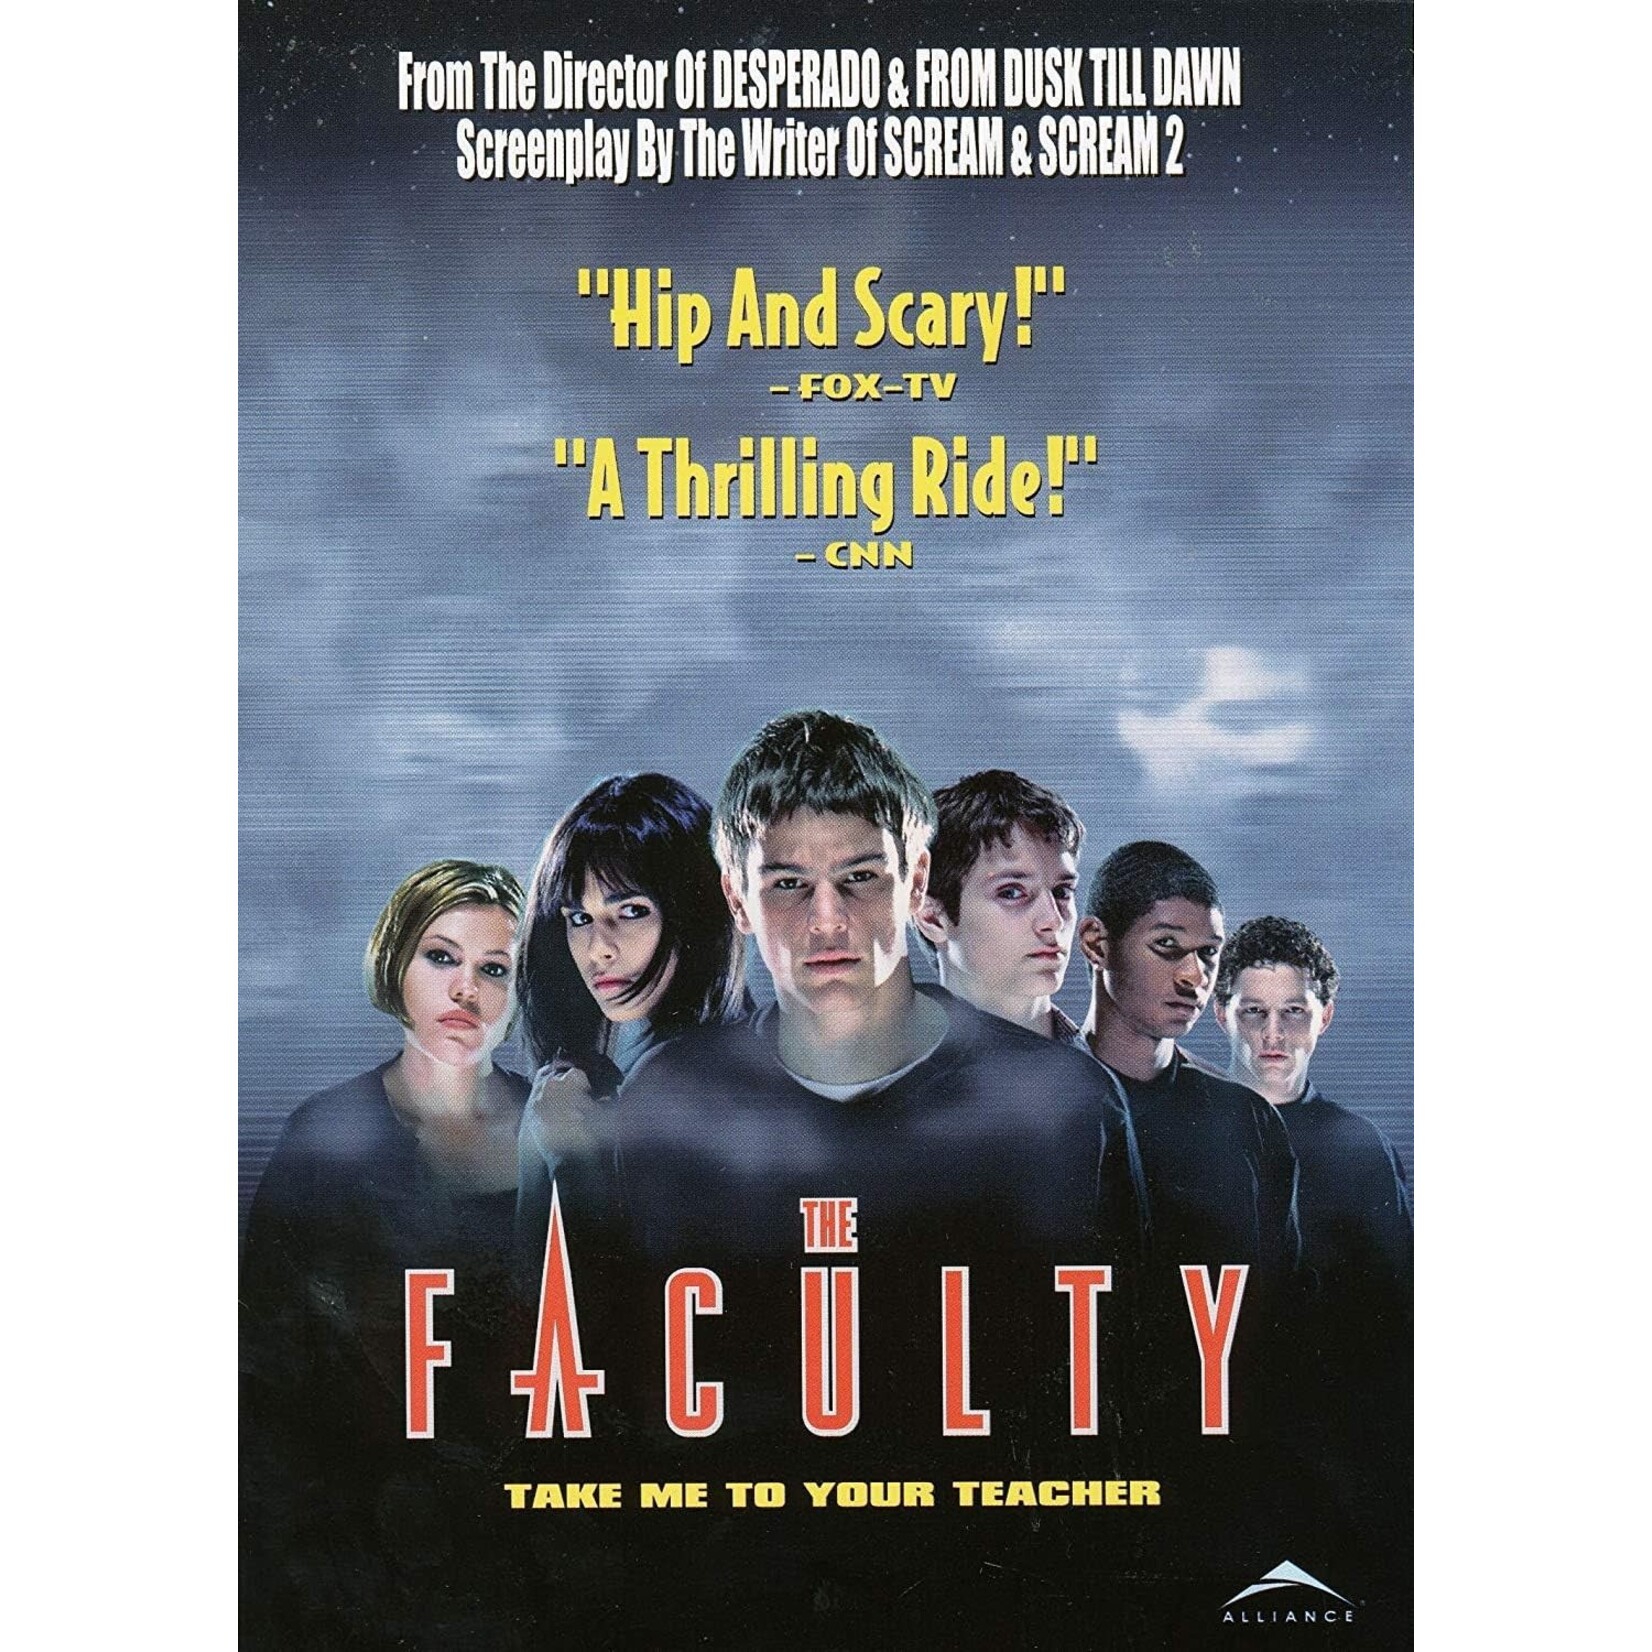 Faculty (1998) [USED DVD]